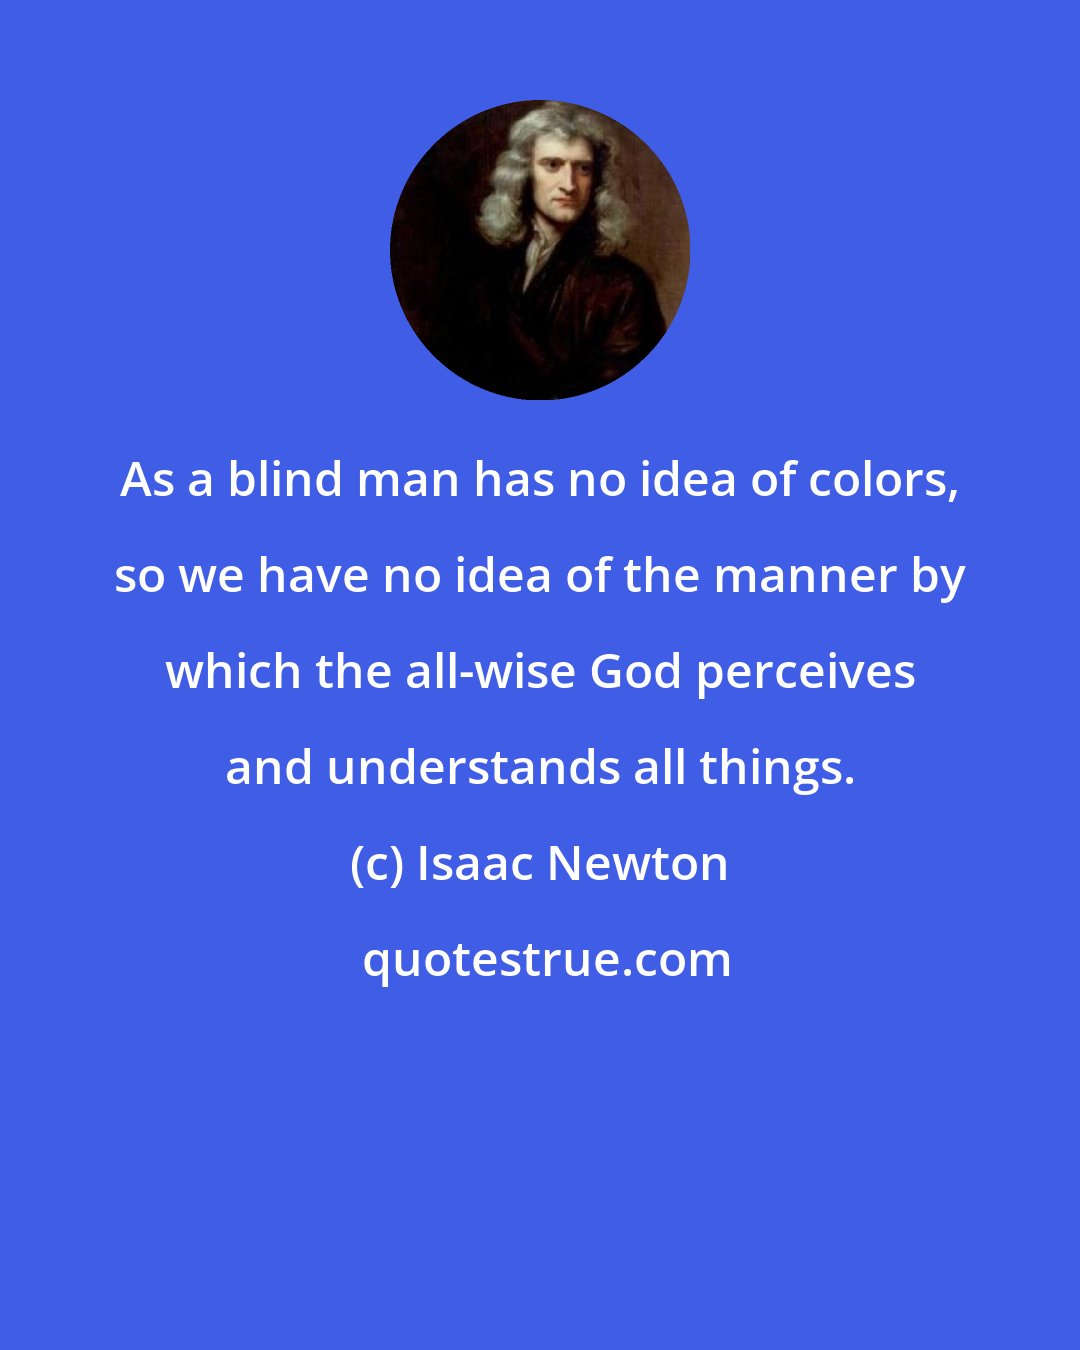 Isaac Newton: As a blind man has no idea of colors, so we have no idea of the manner by which the all-wise God perceives and understands all things.